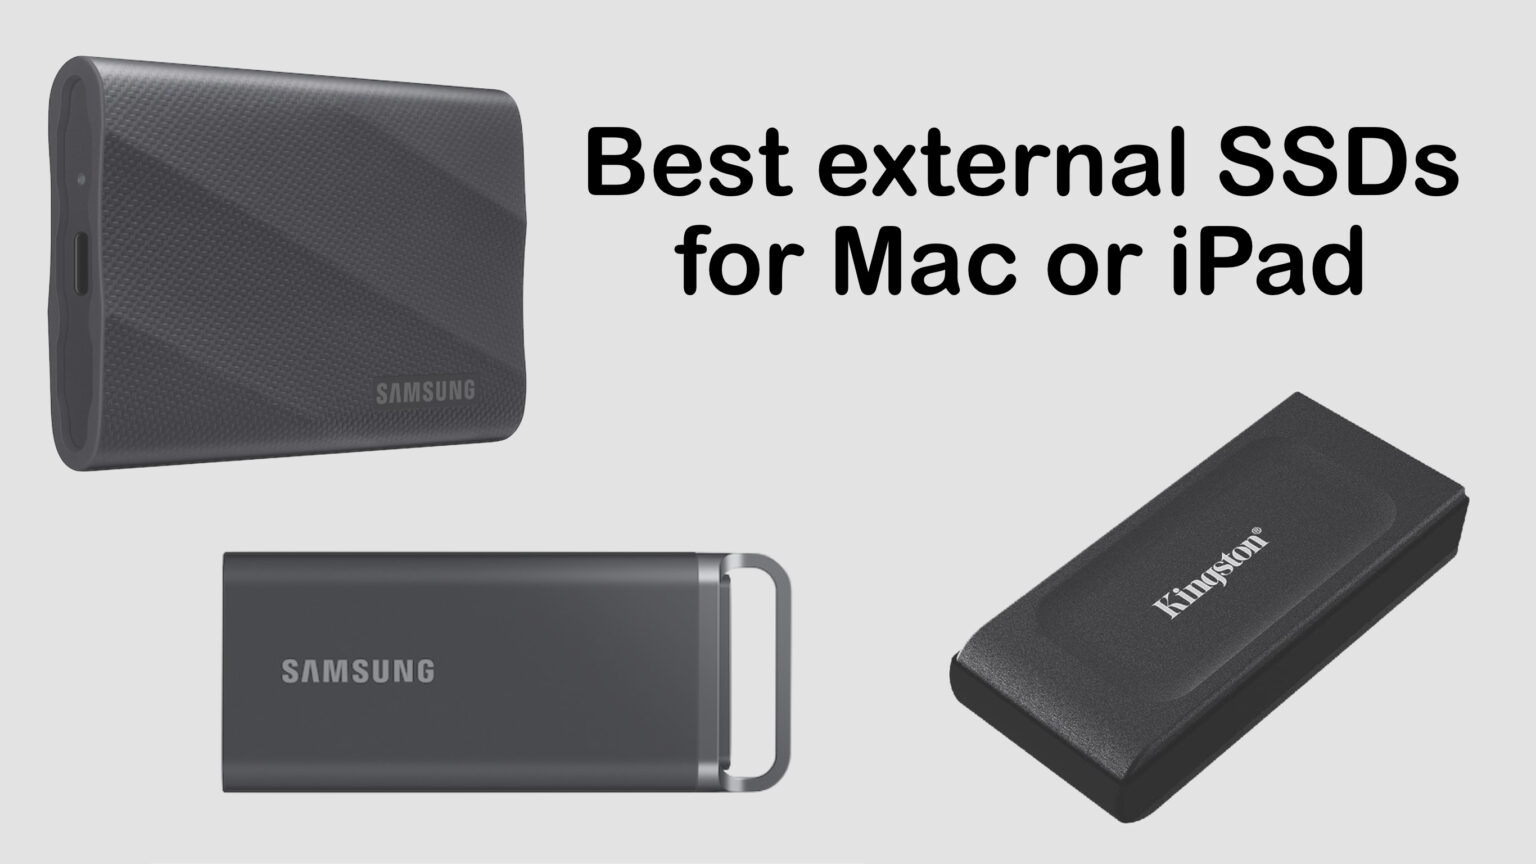 Best external SSDs for Mac or iPad